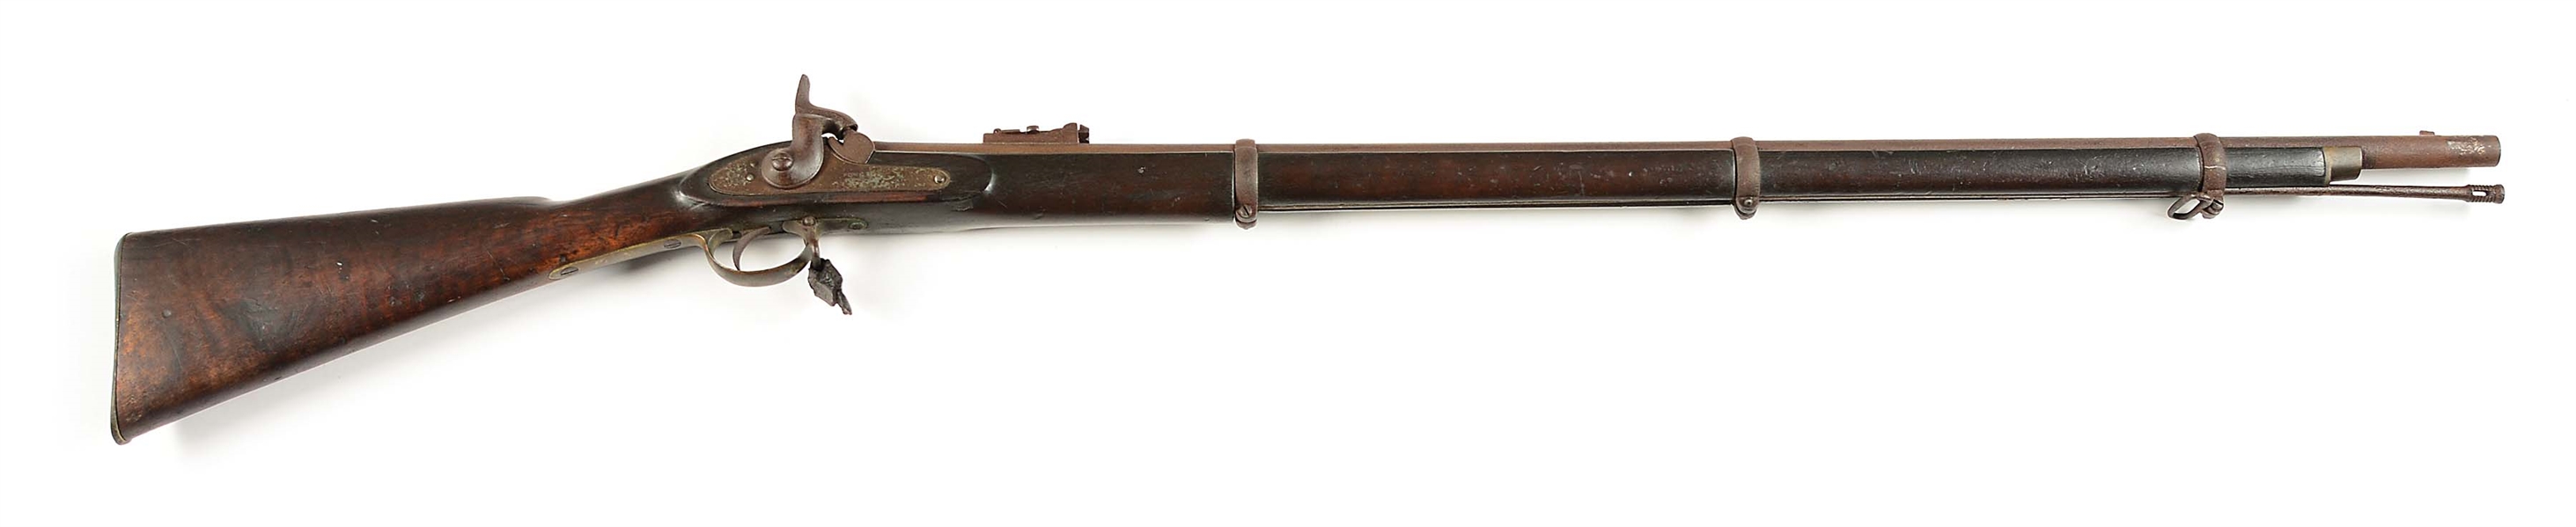 (A) CONFEDERATE ENFIELD PATTERN 1853 PERCUSSION LOCK RIFLED-MUSKET DATED 1862.